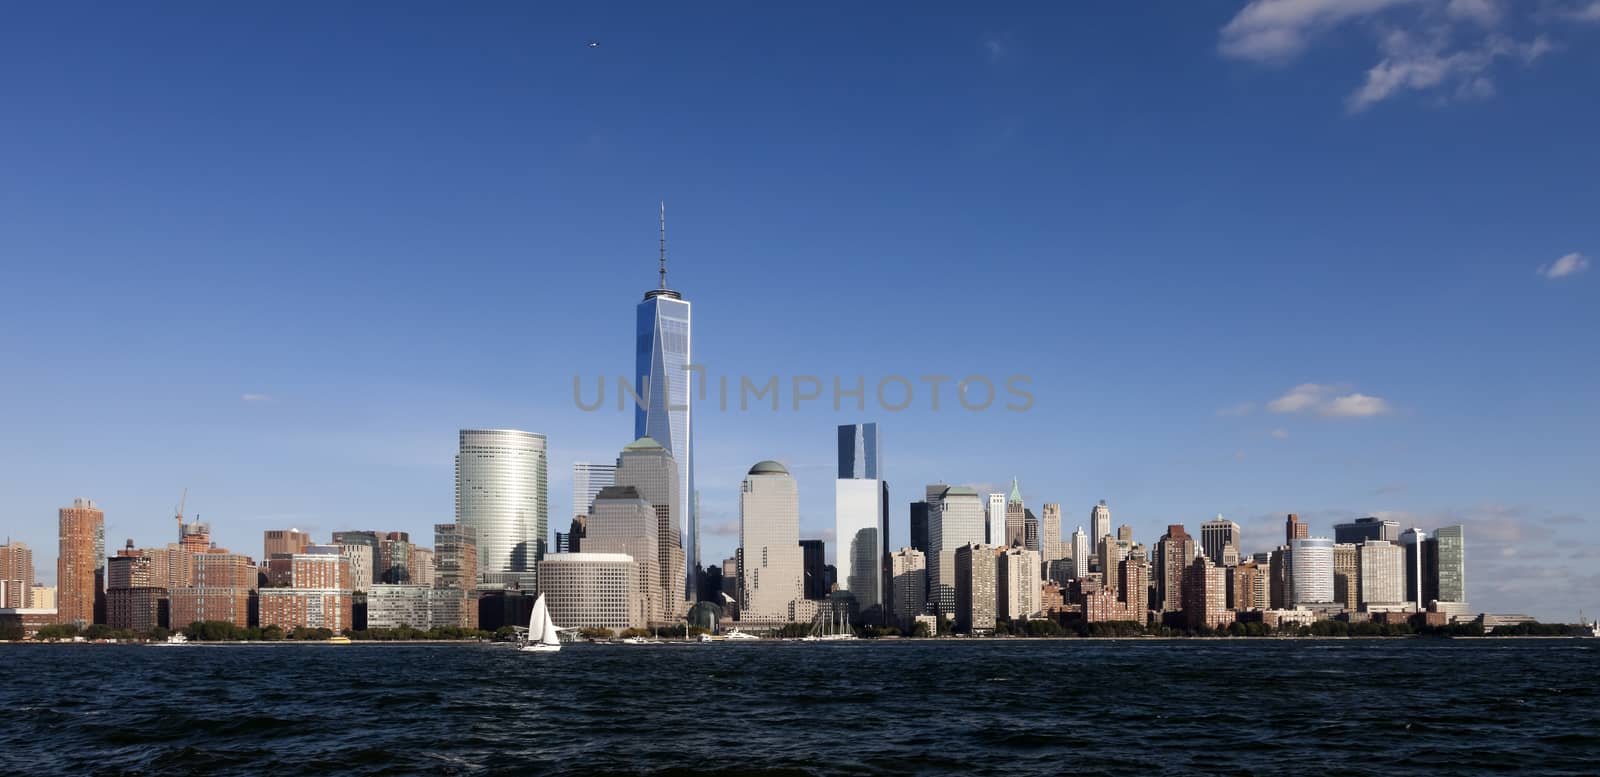 The New York City Downtown w the Freedom tower 2014 by hanusst